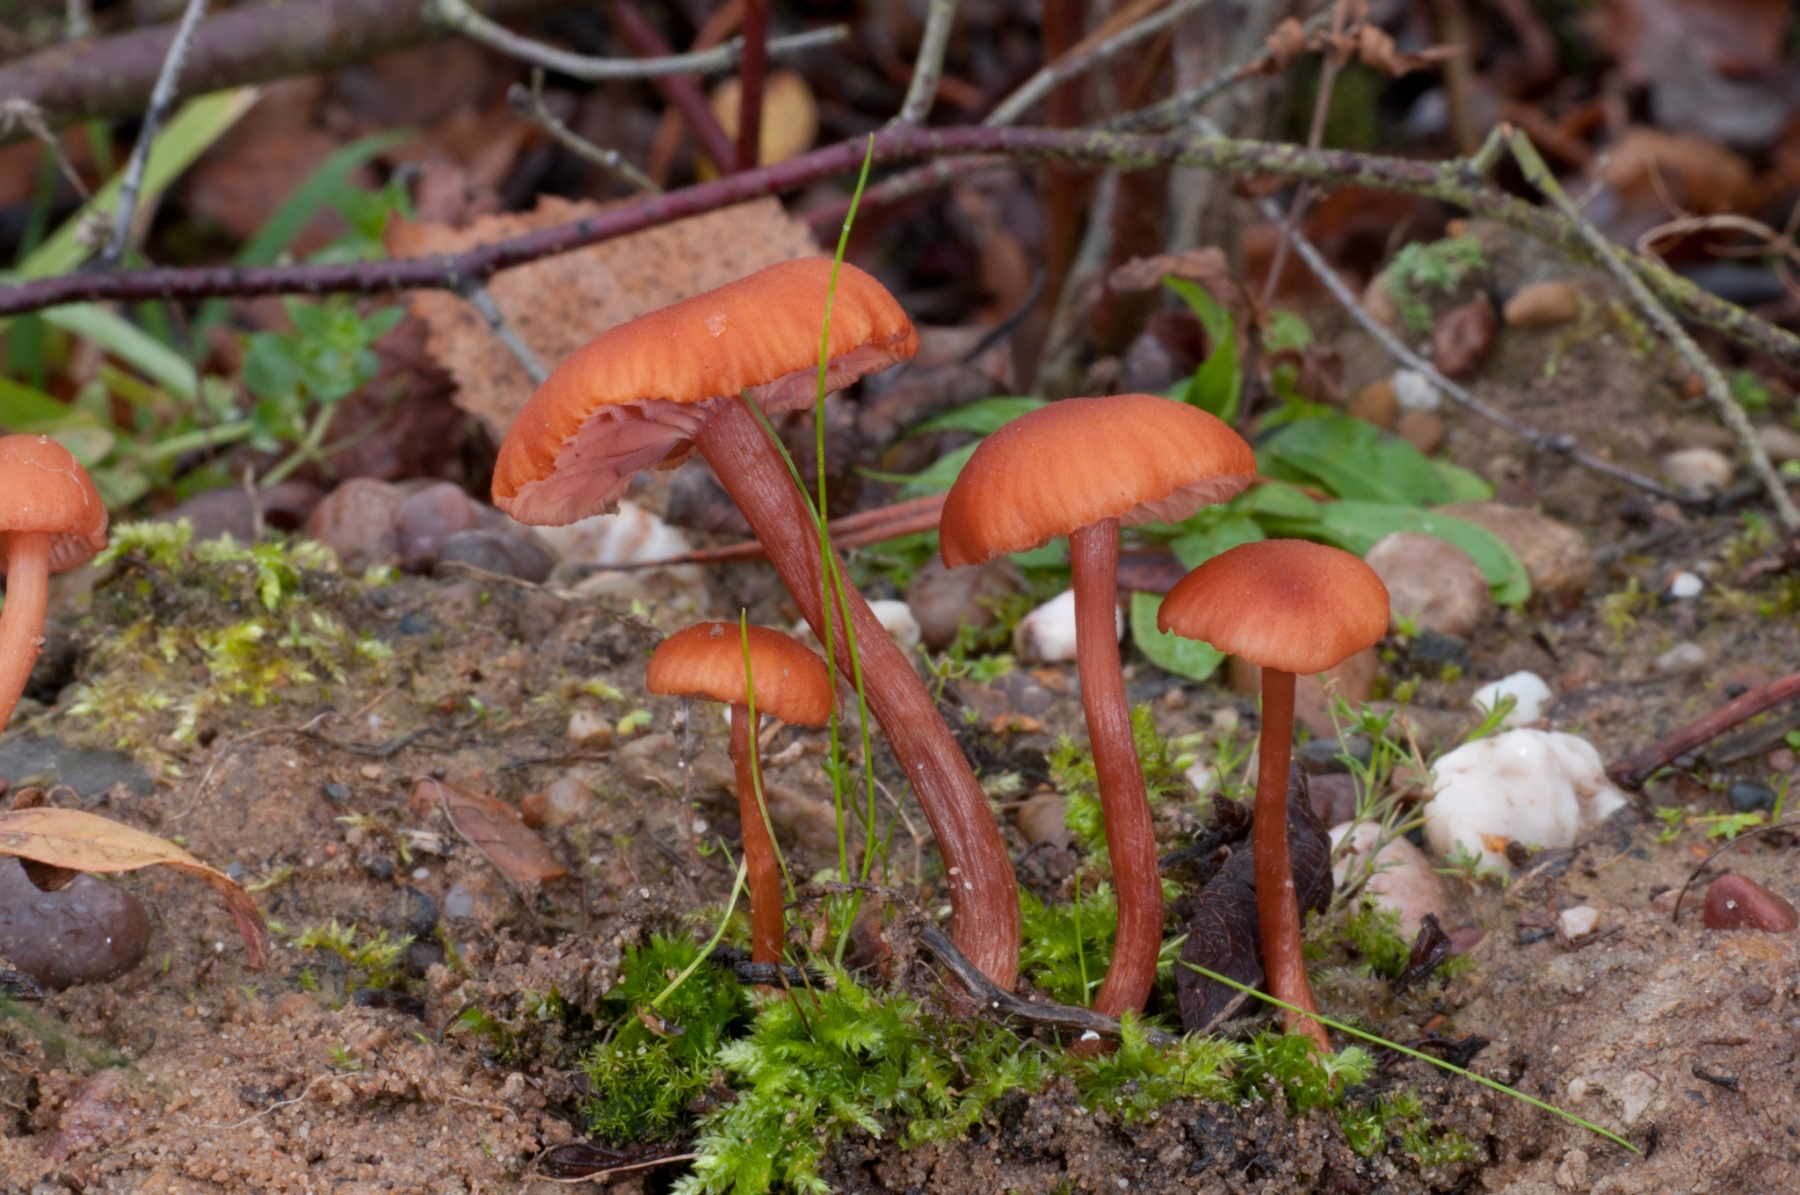 Laccaria laccata - The Deceiver, Lound, Notts.